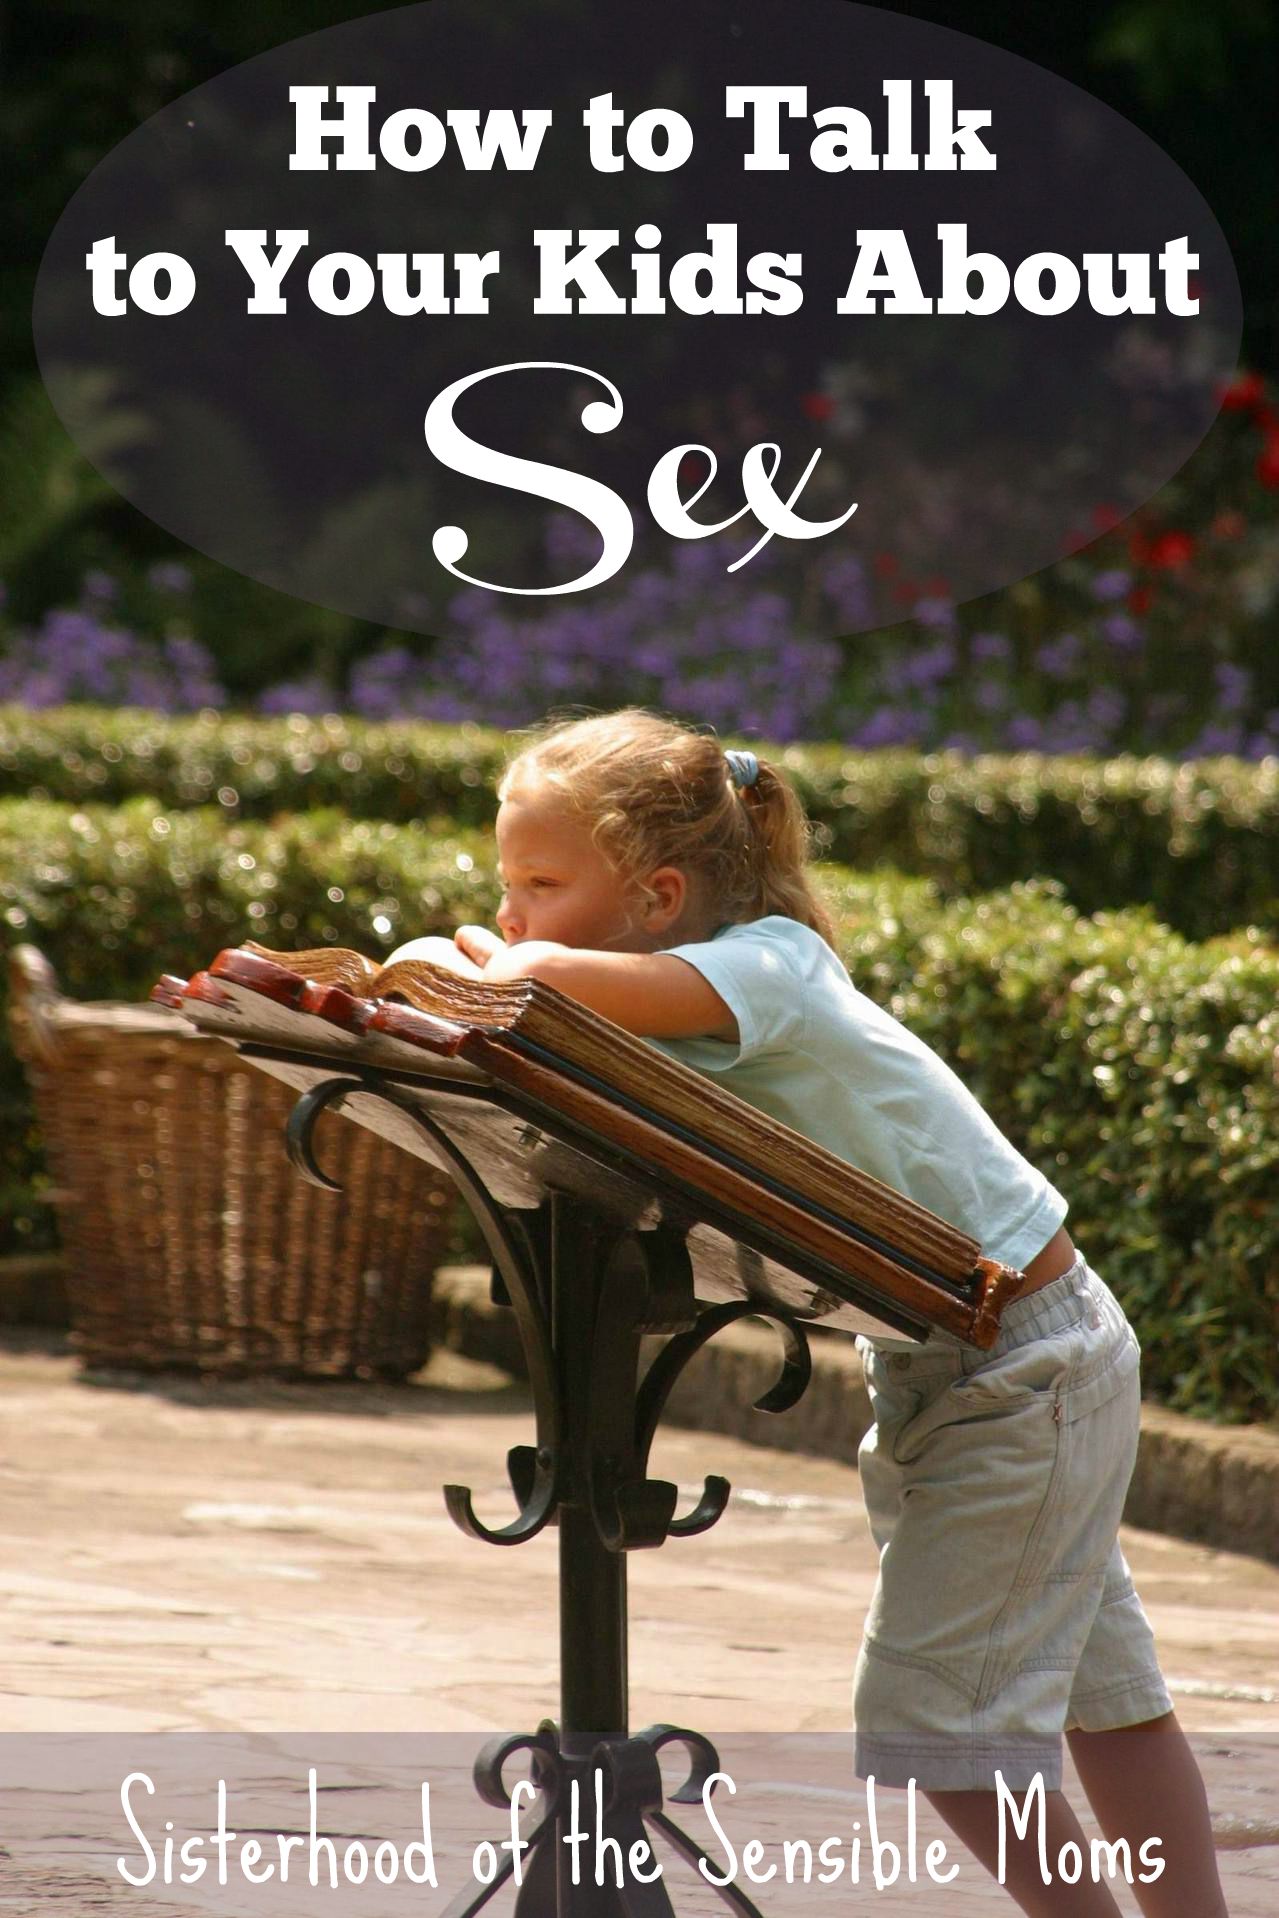 How to Talk to Your Kids About Sex: Practical Parenting Advice and Book Recommendations | Sisterhood of the Sensible Moms